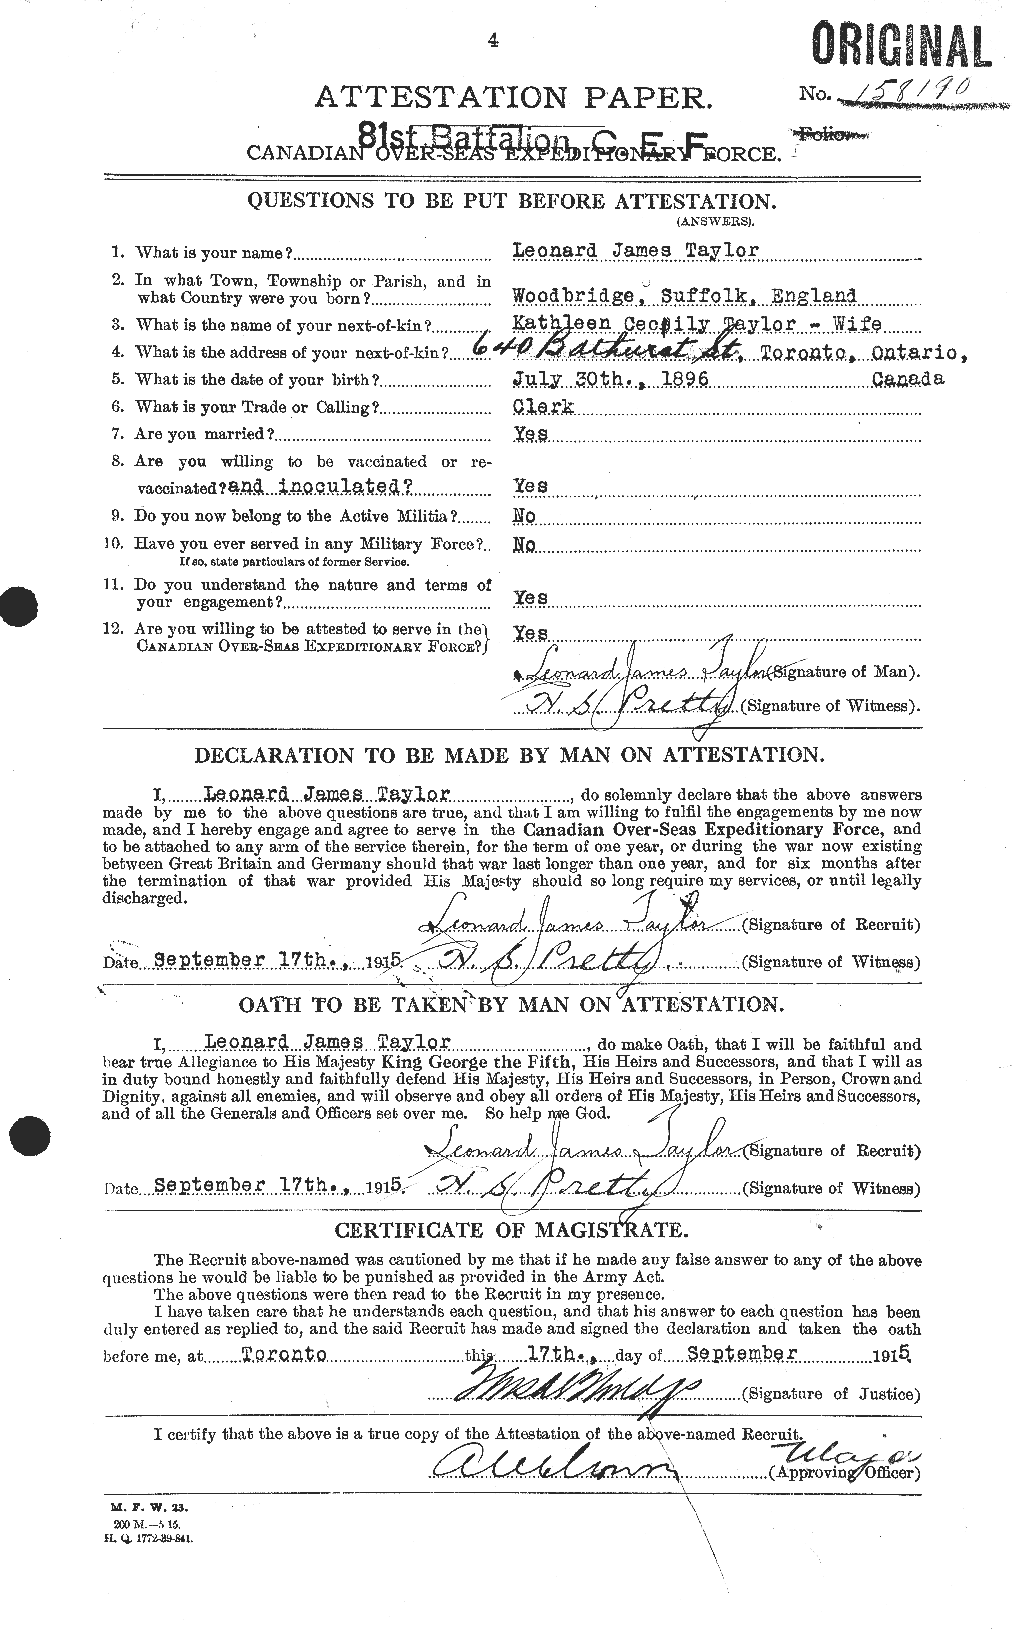 Personnel Records of the First World War - CEF 627630a